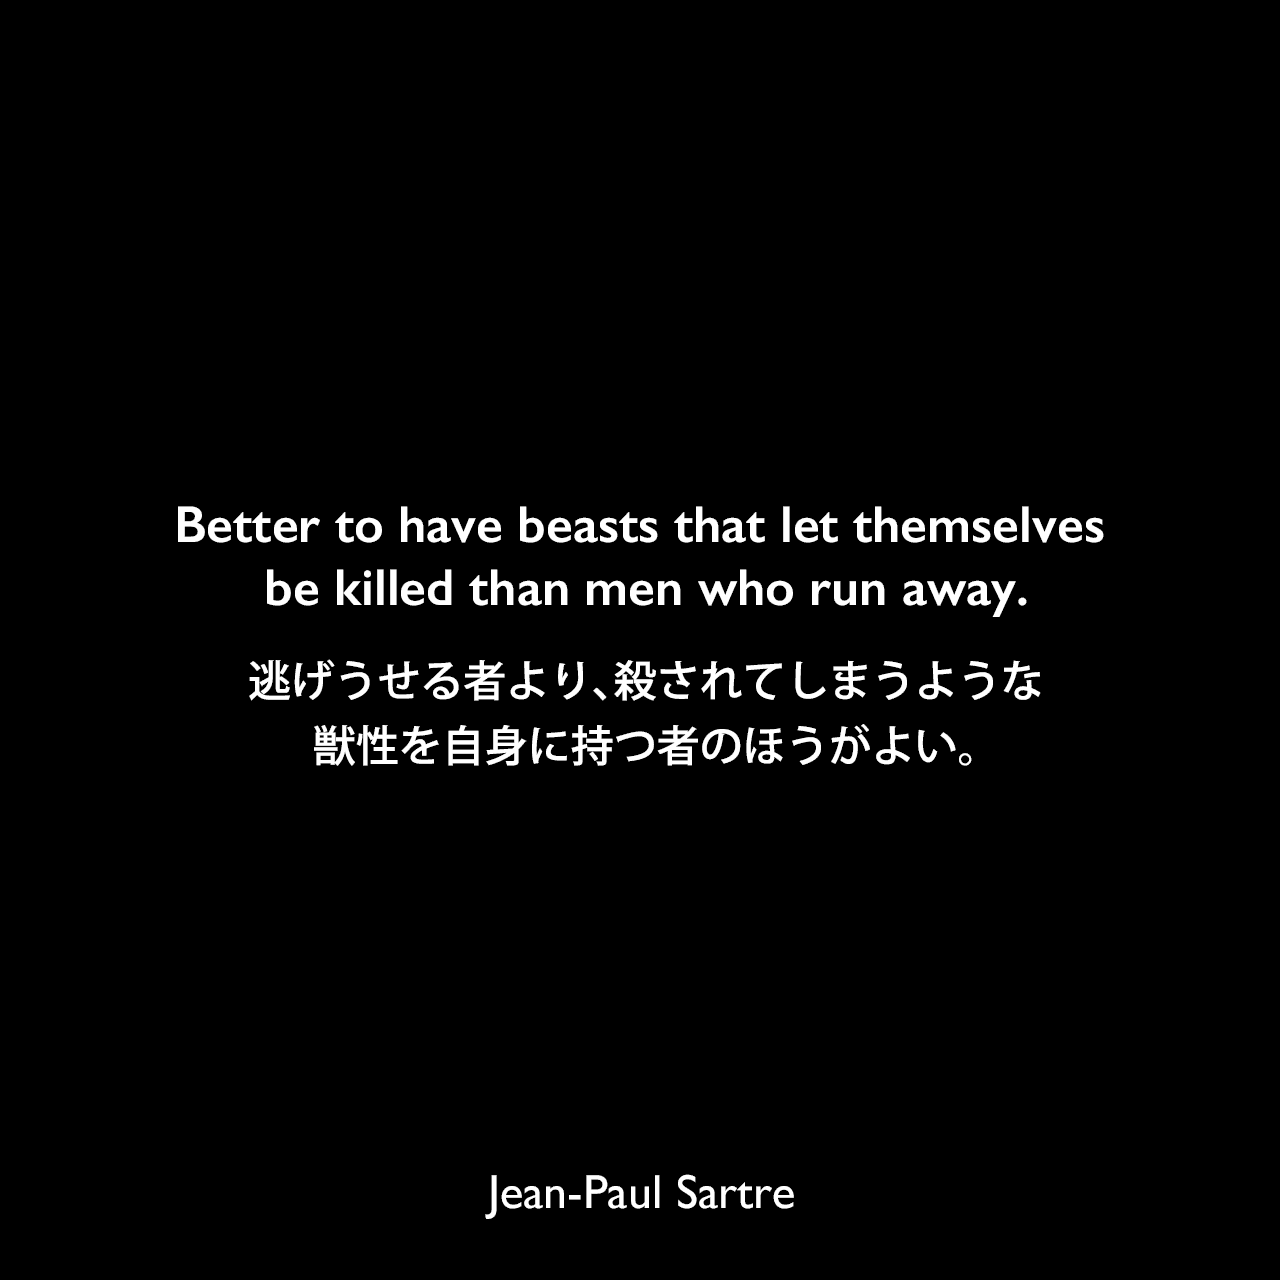 Better to have beasts that let themselves be killed than men who run away.逃げうせる者より、殺されてしまうような獣性を自身に持つ者のほうがよい。- サルトルによる戯曲「悪魔と神」よりJean-Paul Sartre